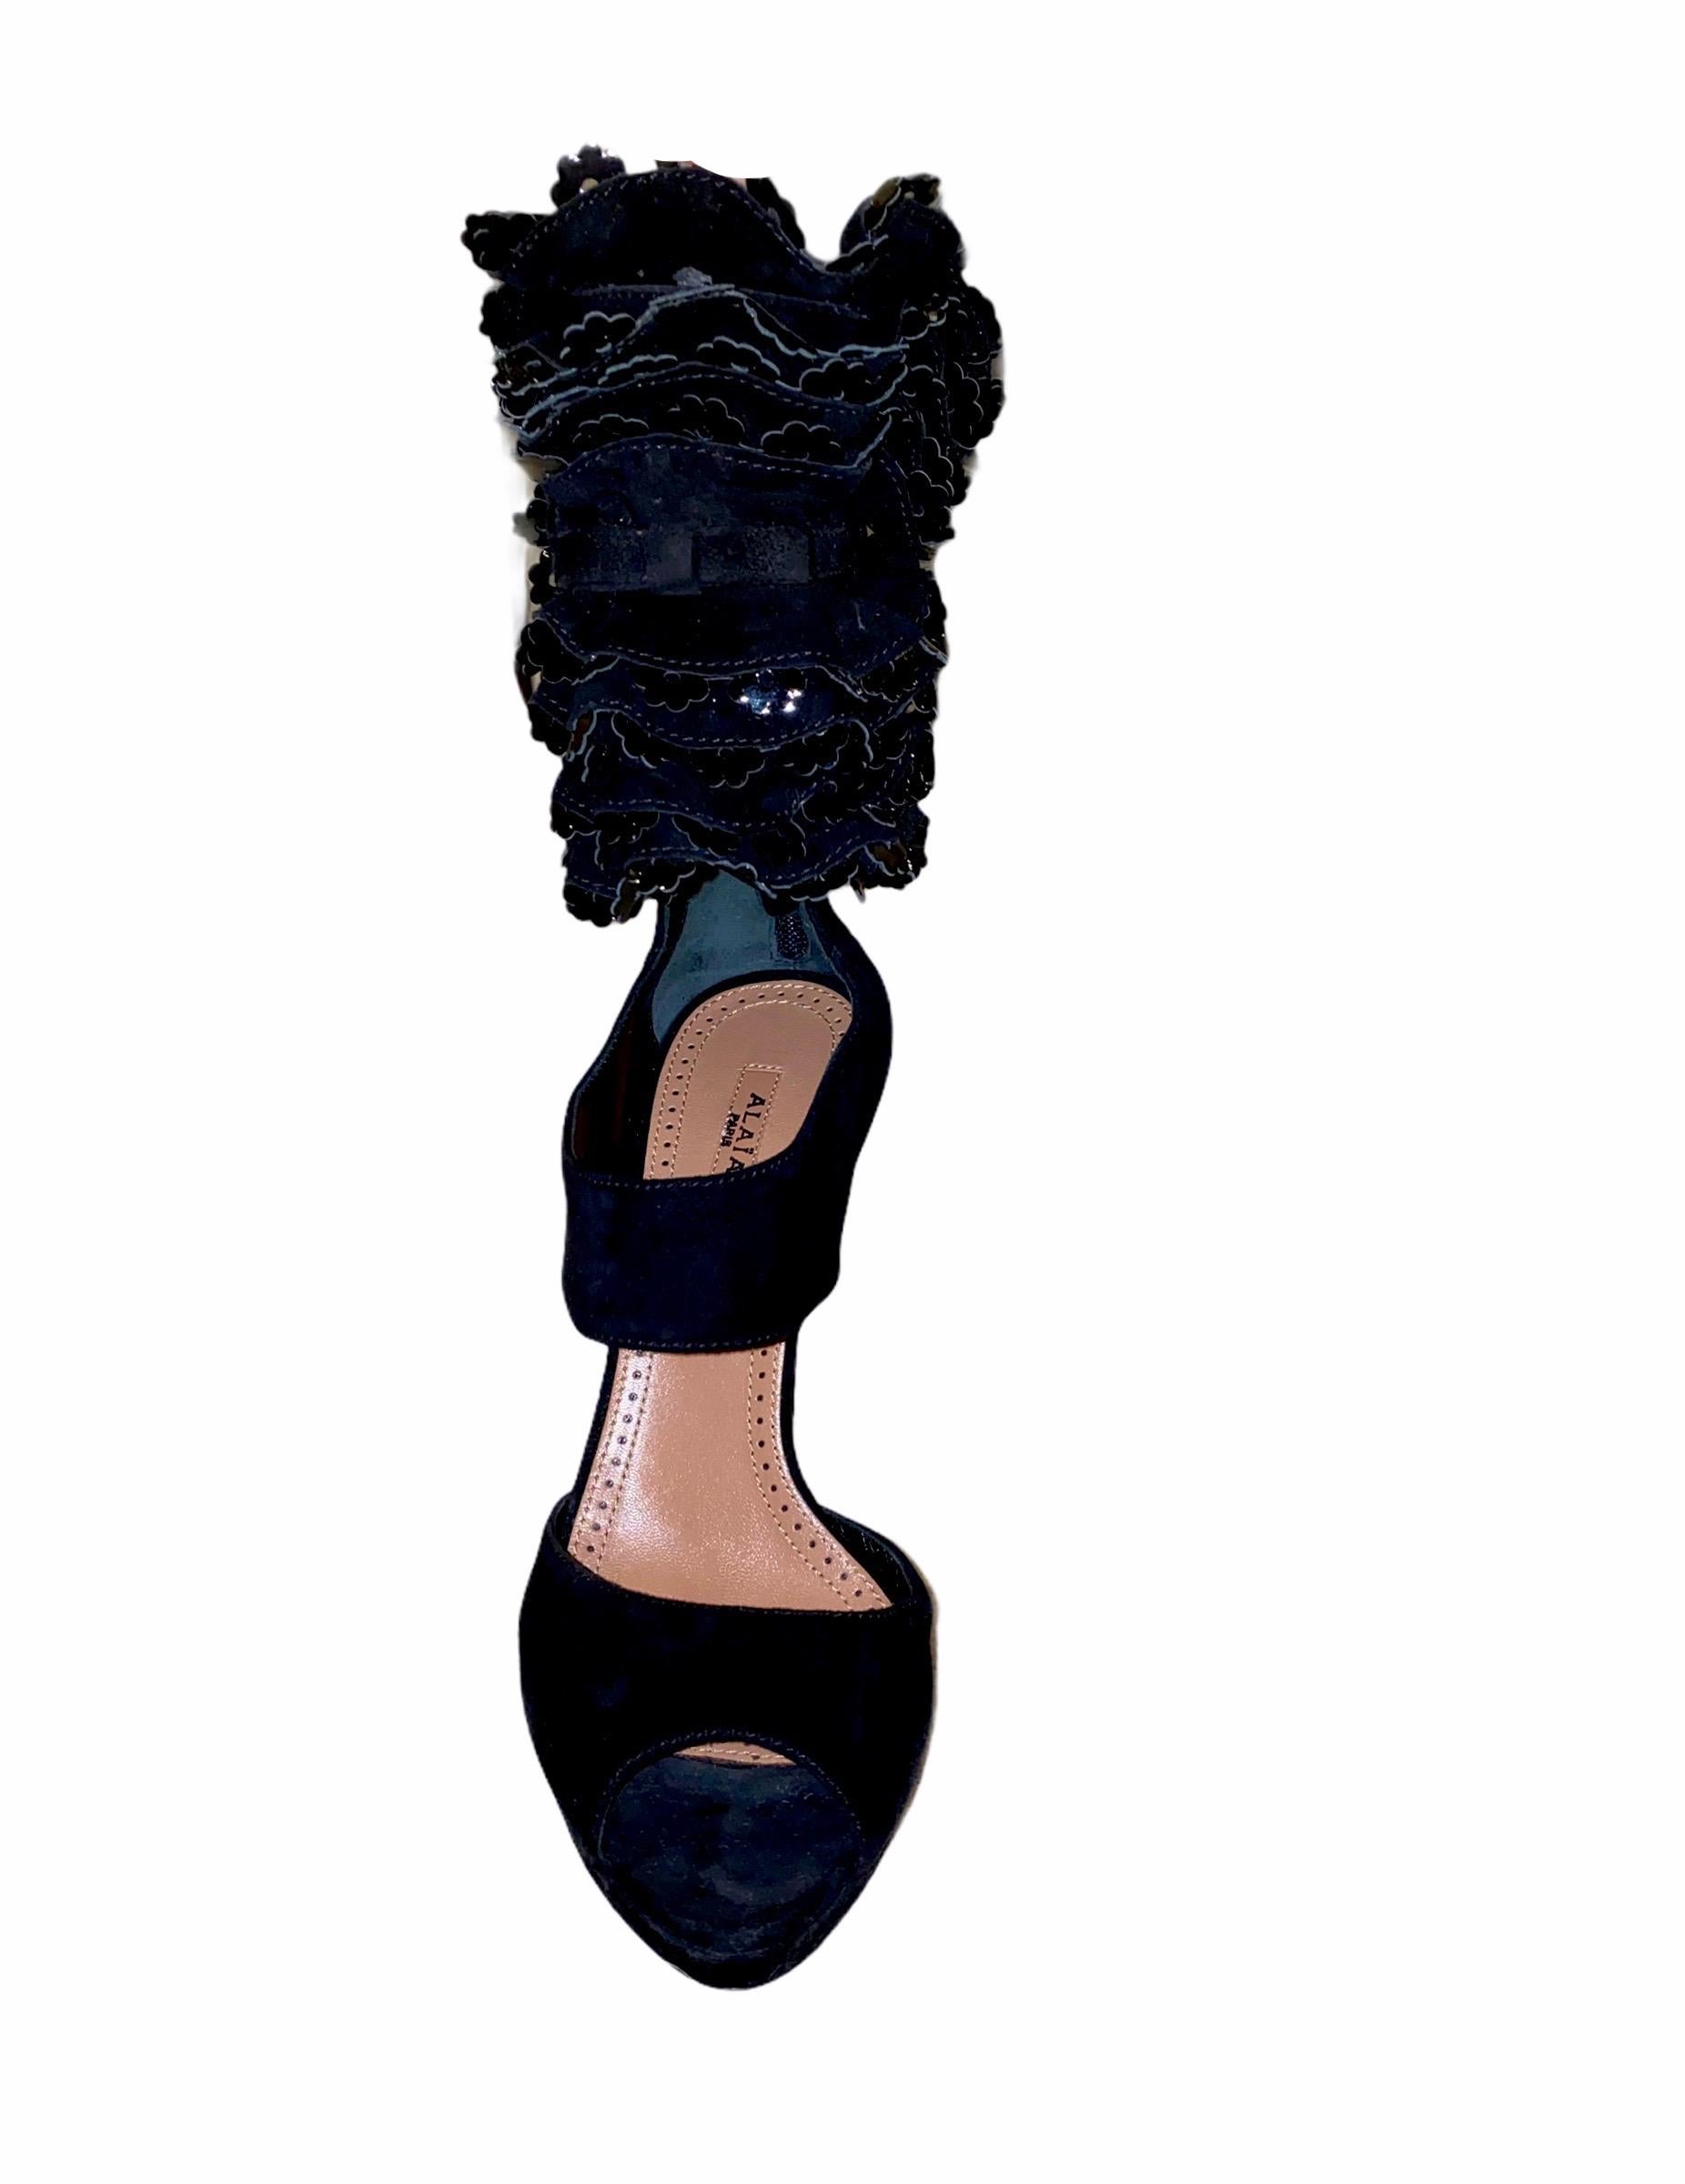 An AZZEDINE ALAIA classic signature piece that will last you for years
This gorgeous pair of heels are made out of finest black suede with ruffle cut-out details at ankles
Zipper closure discreetly engraved with 